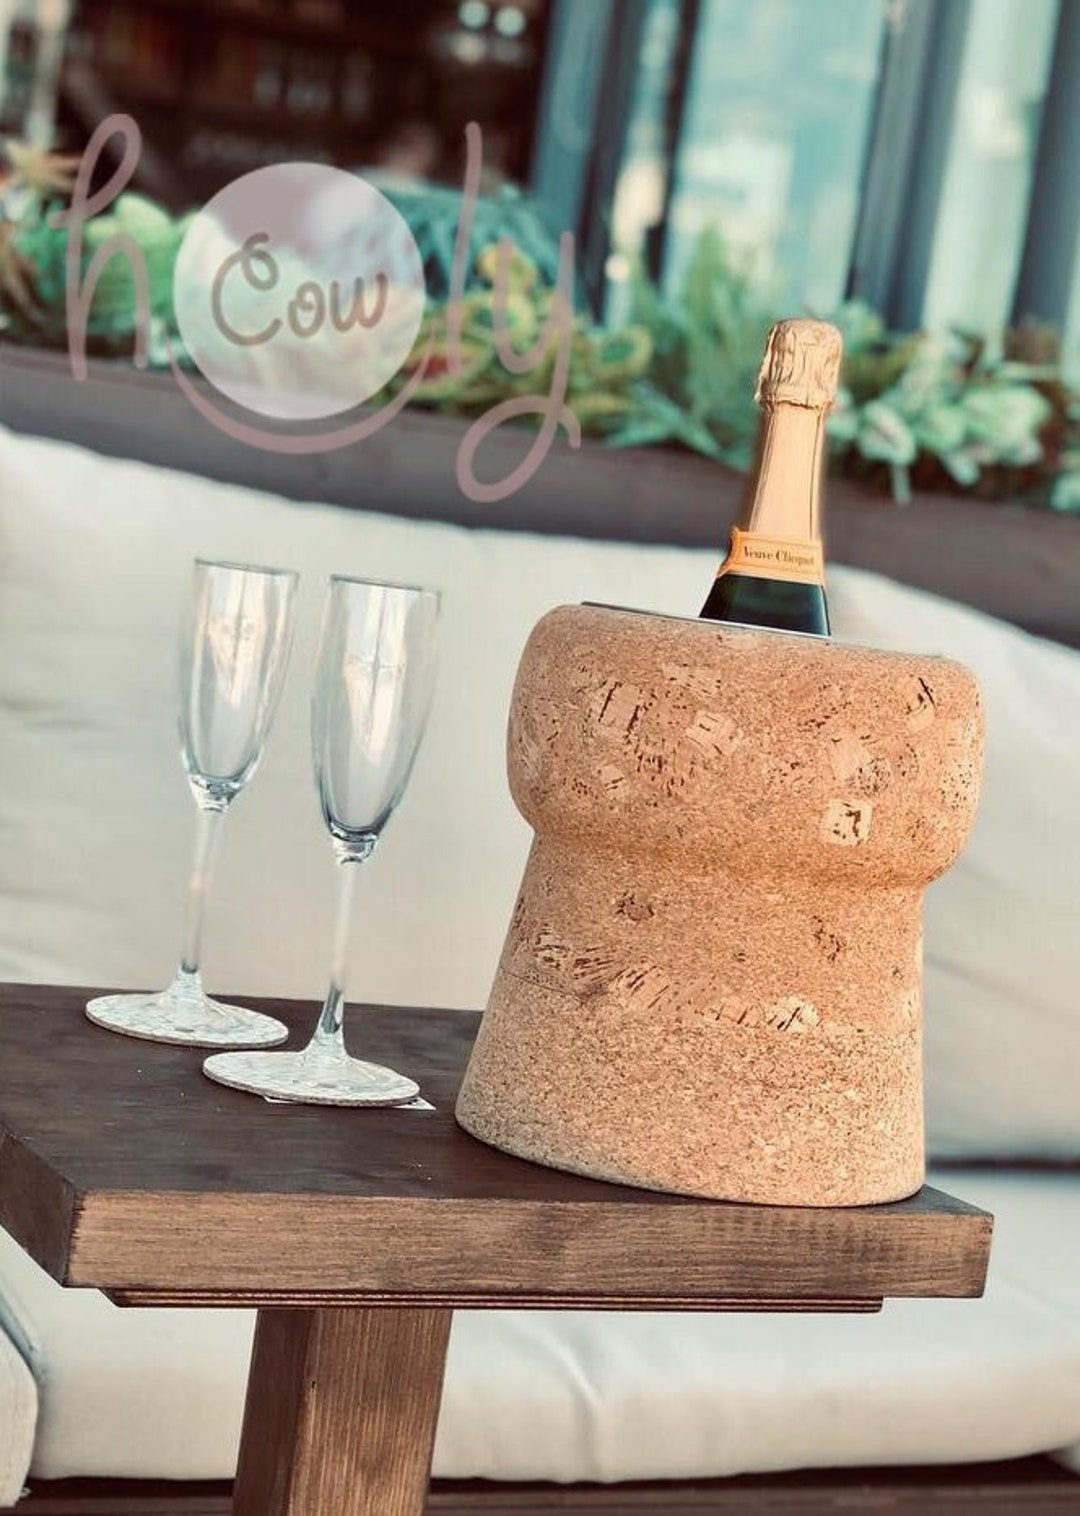 Creative champagne bucket - made of cork  Champagne corks, Champagne  cooler, Cork